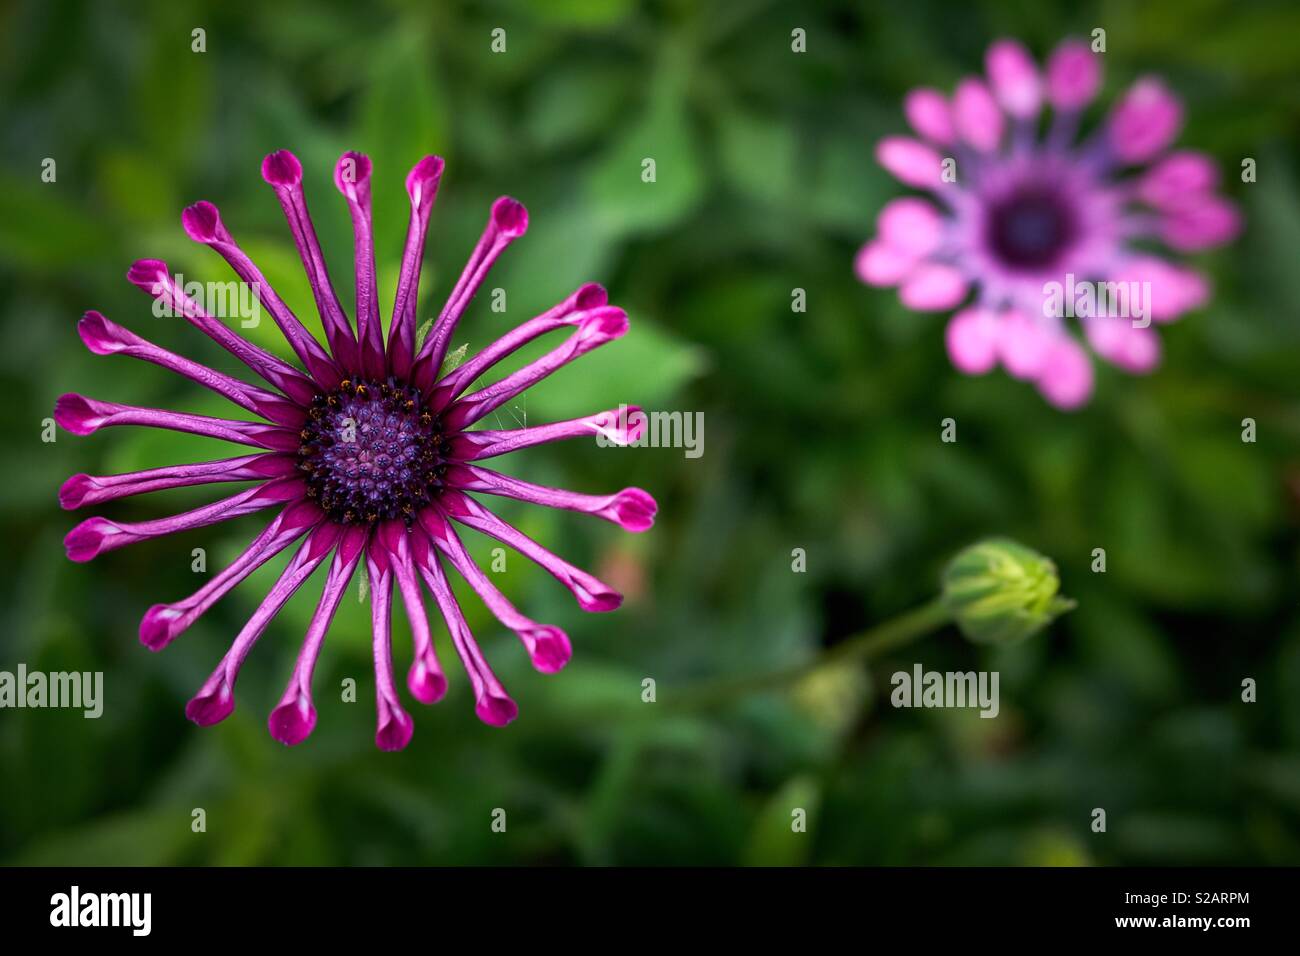 A pink spider osteospermum against a lush green background Stock Photo